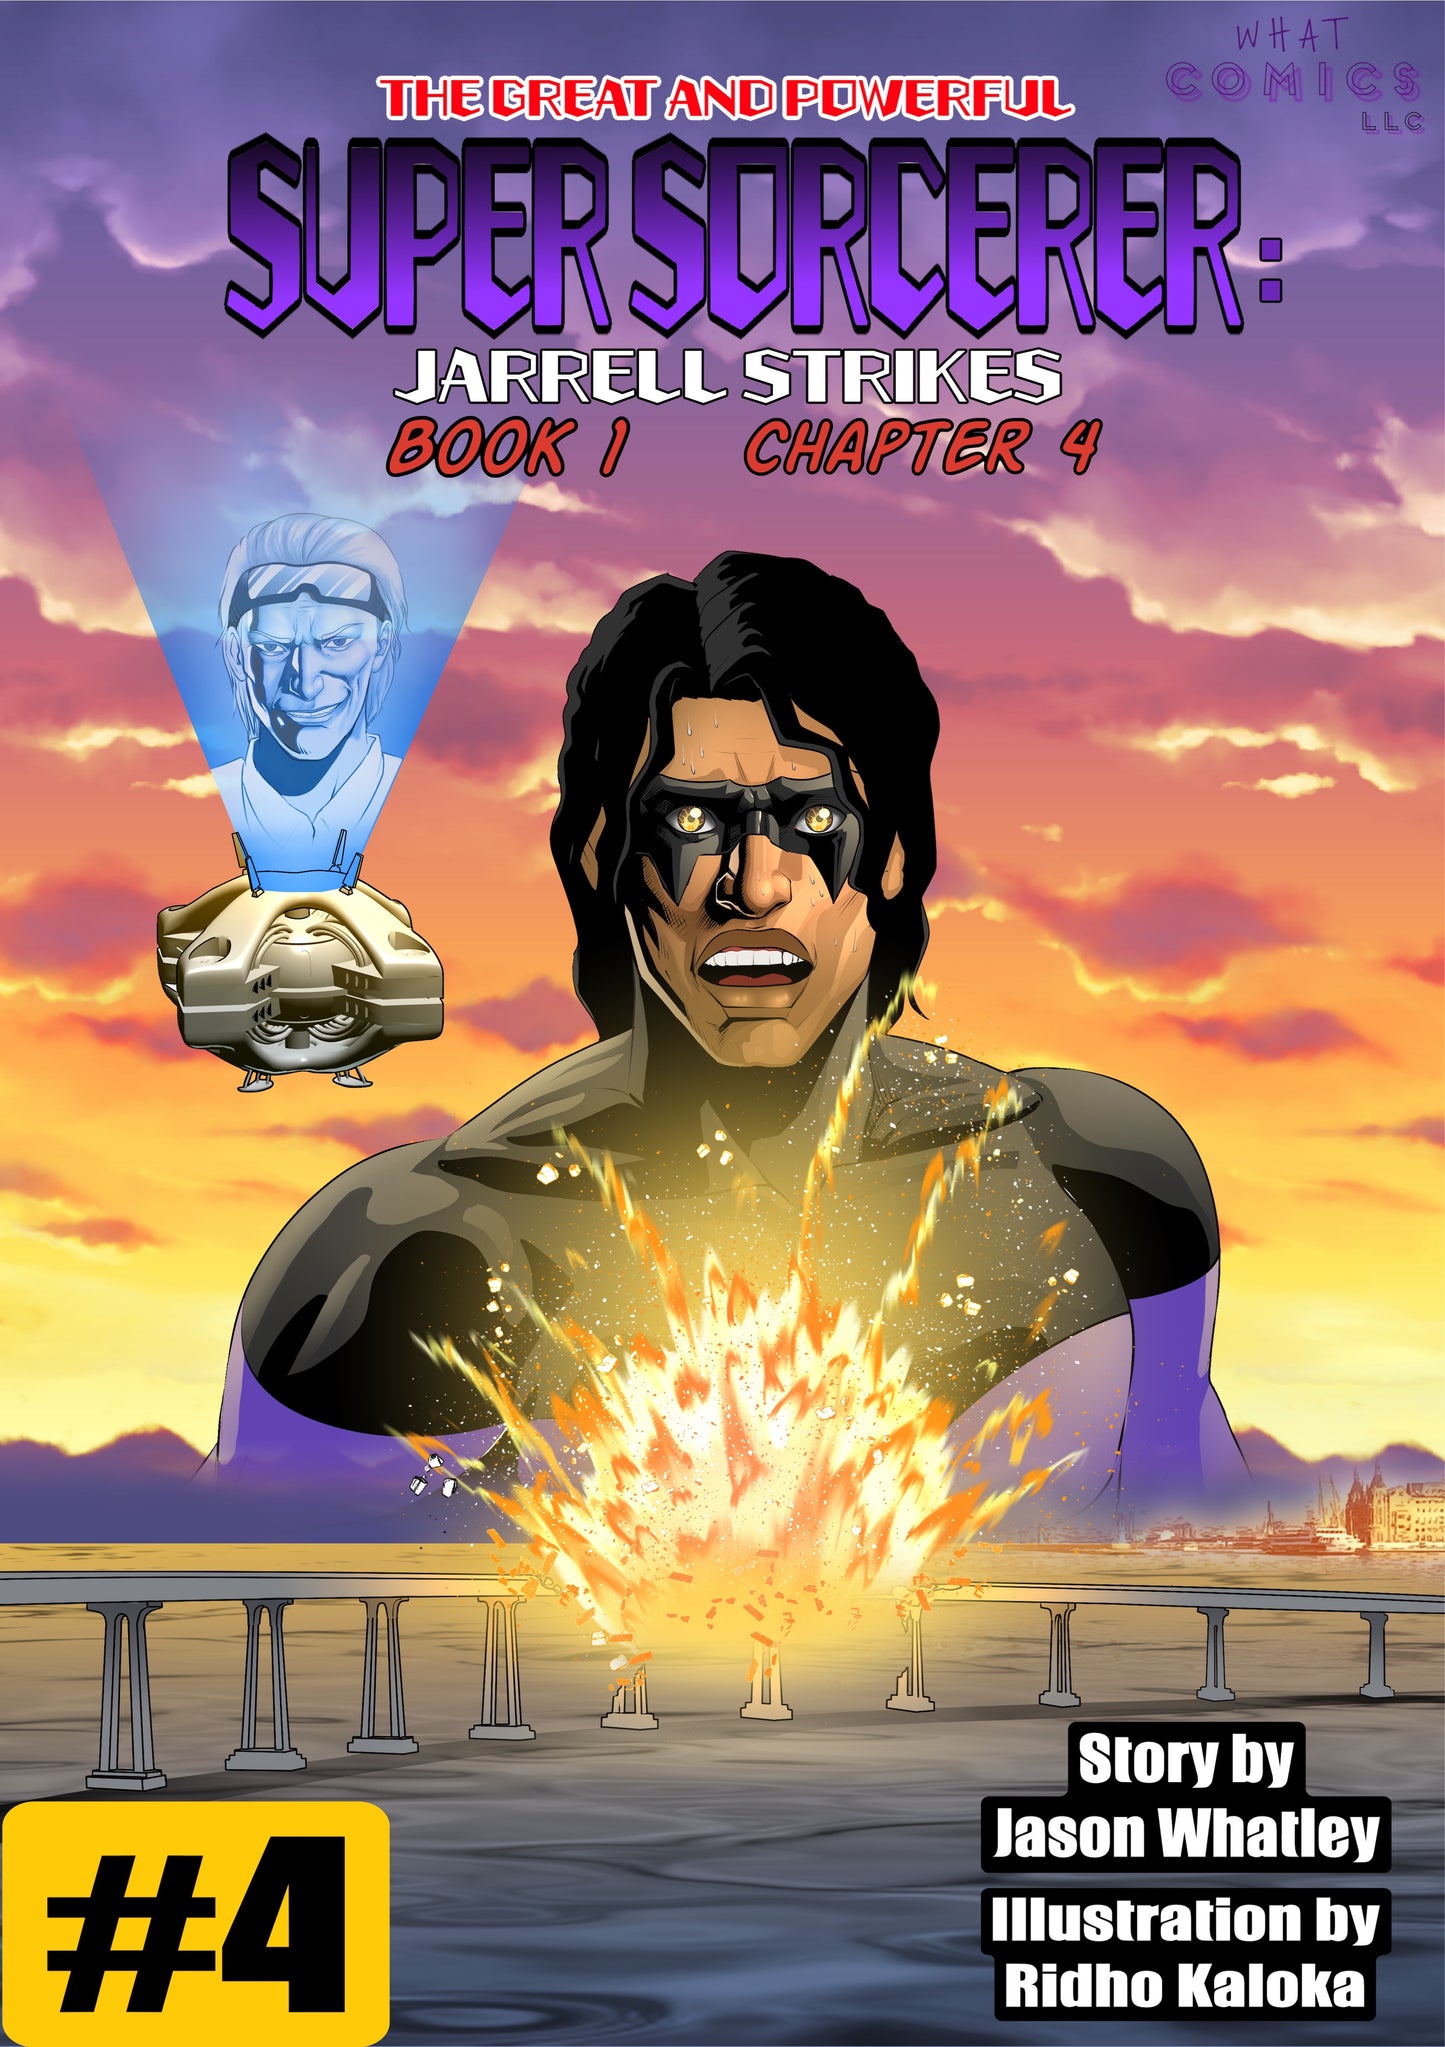 "The Great & Powerful Super Sorcerer: Jarrell Strikes!"